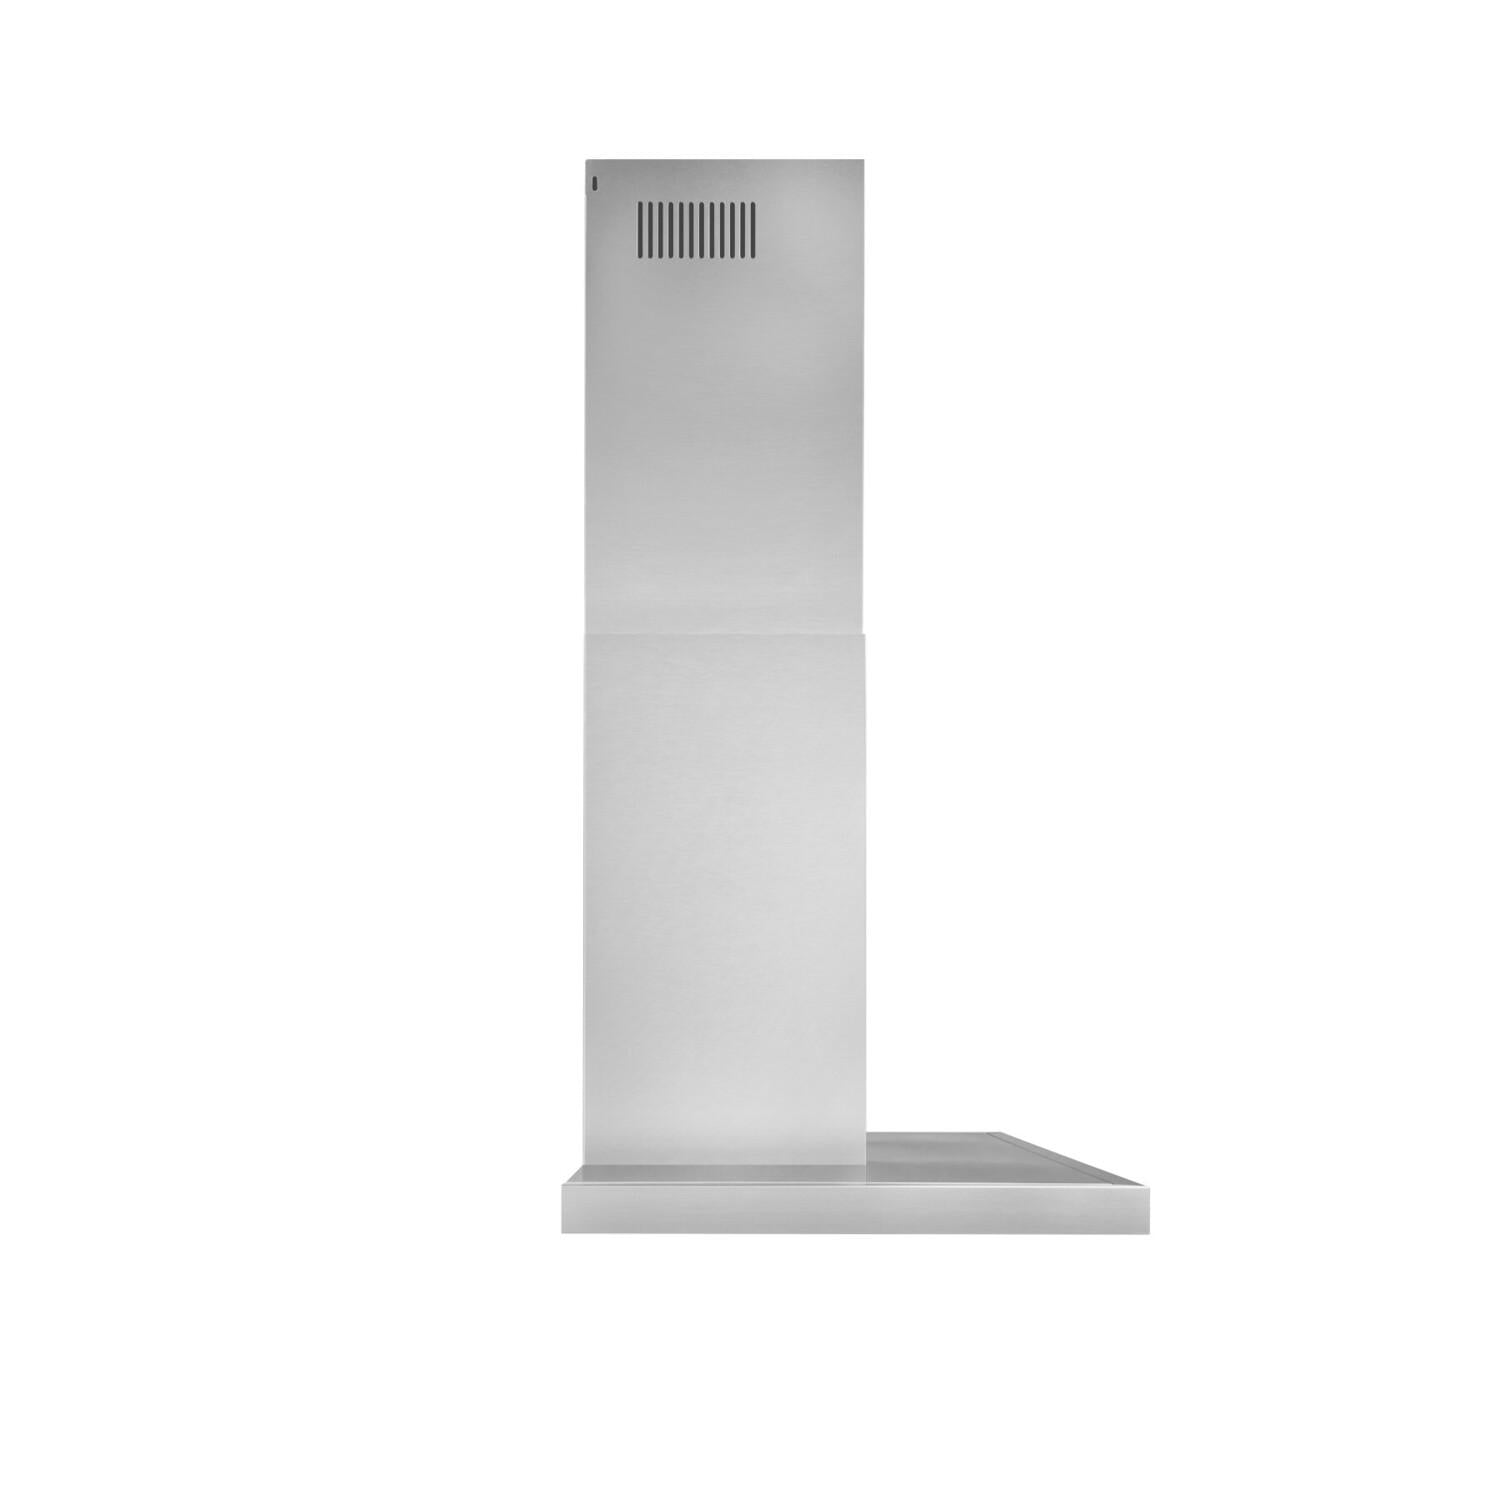 Broan BWT1304SS Broan® 30-Inch Convertible Wall-Mount T-Style Chimney Range Hood, 450 Max Cfm, Stainless Steel